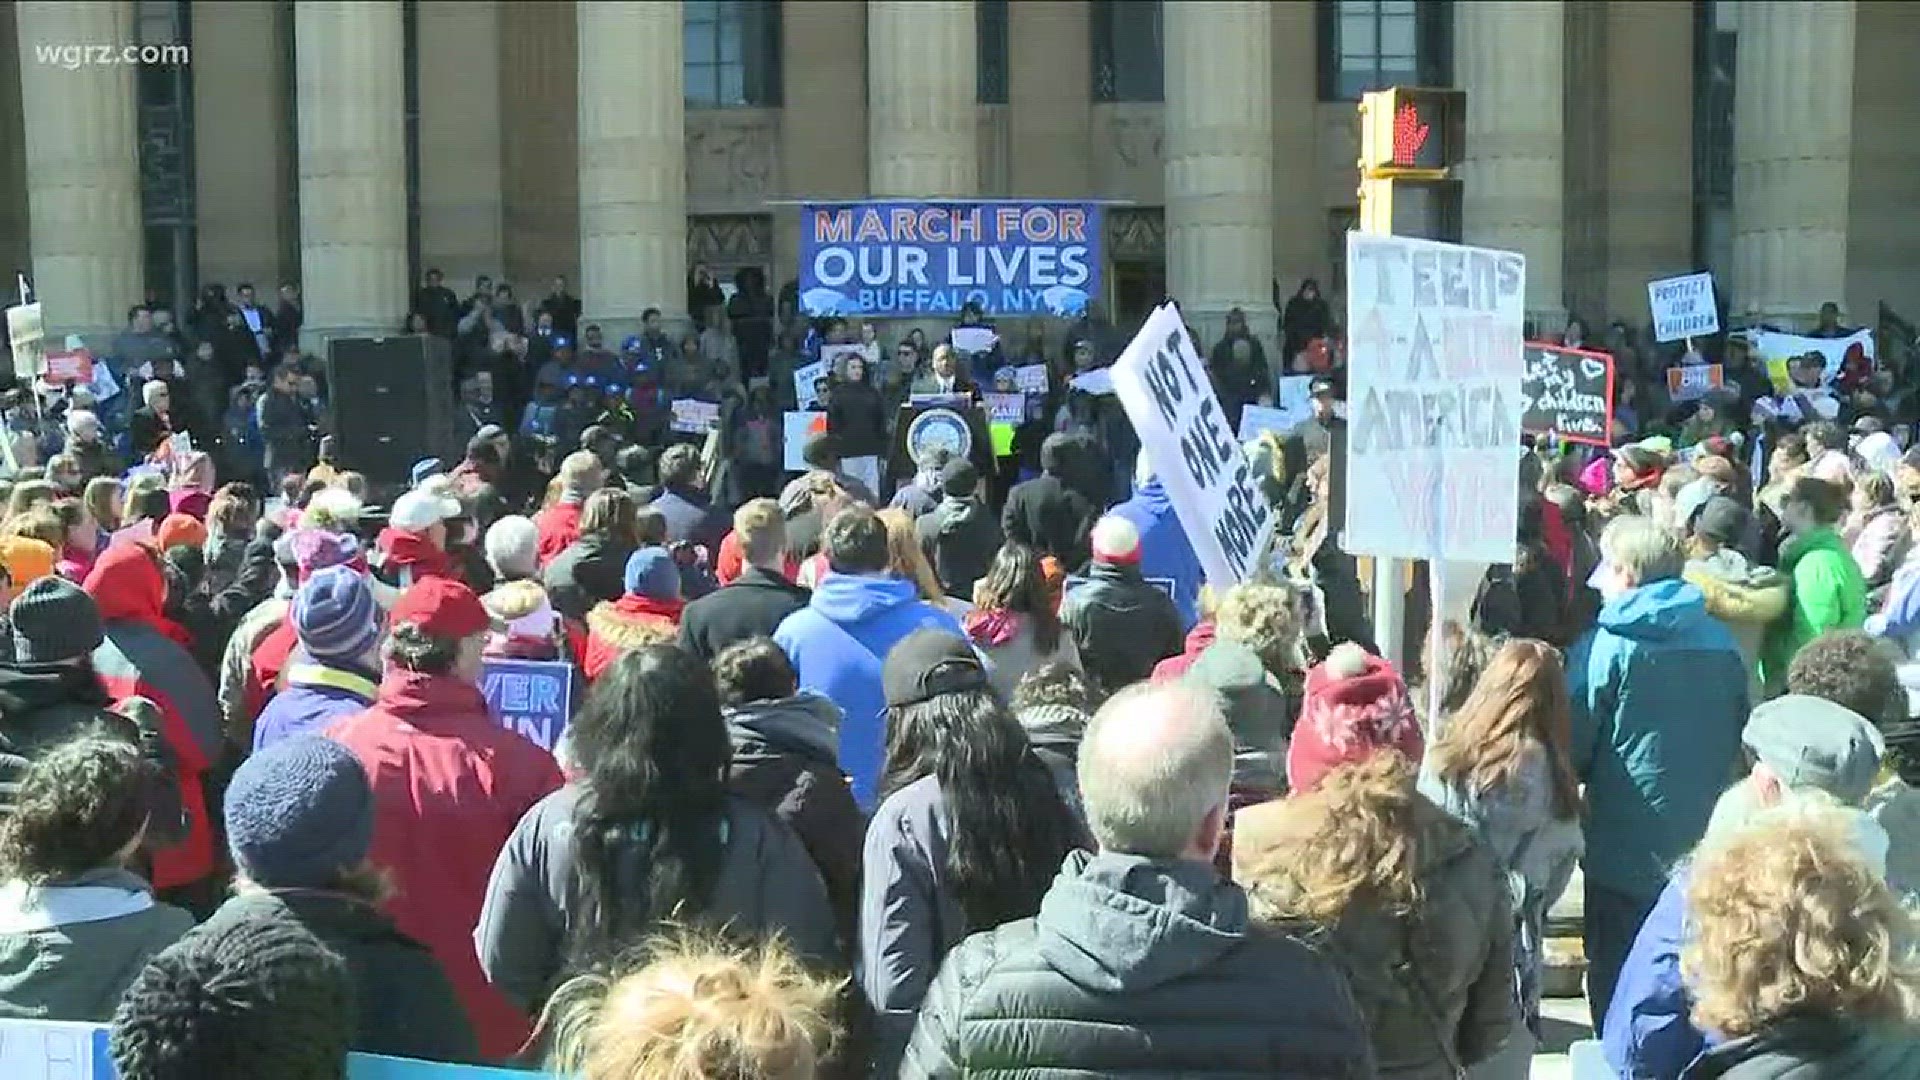 "March For Our Lives" rally in Buffalo